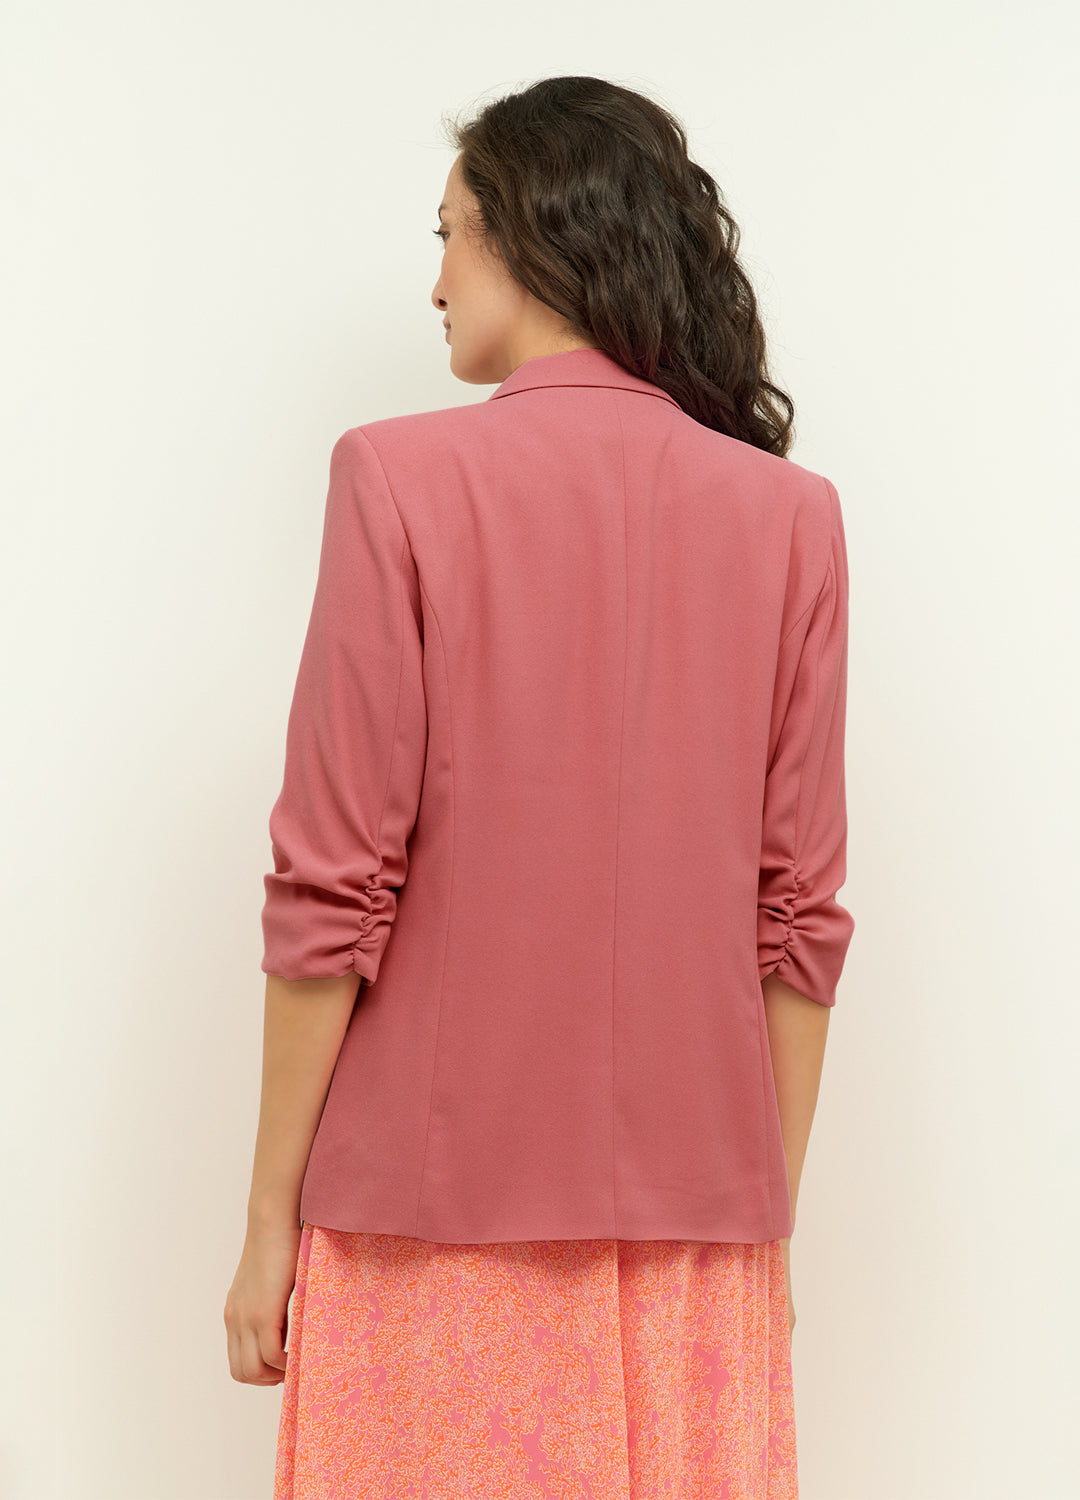 Back of the Cream Clothing Cocamia Blazer in Flowering Ginger pink at Inner Beach Co, Toronto, Ontario, Canada